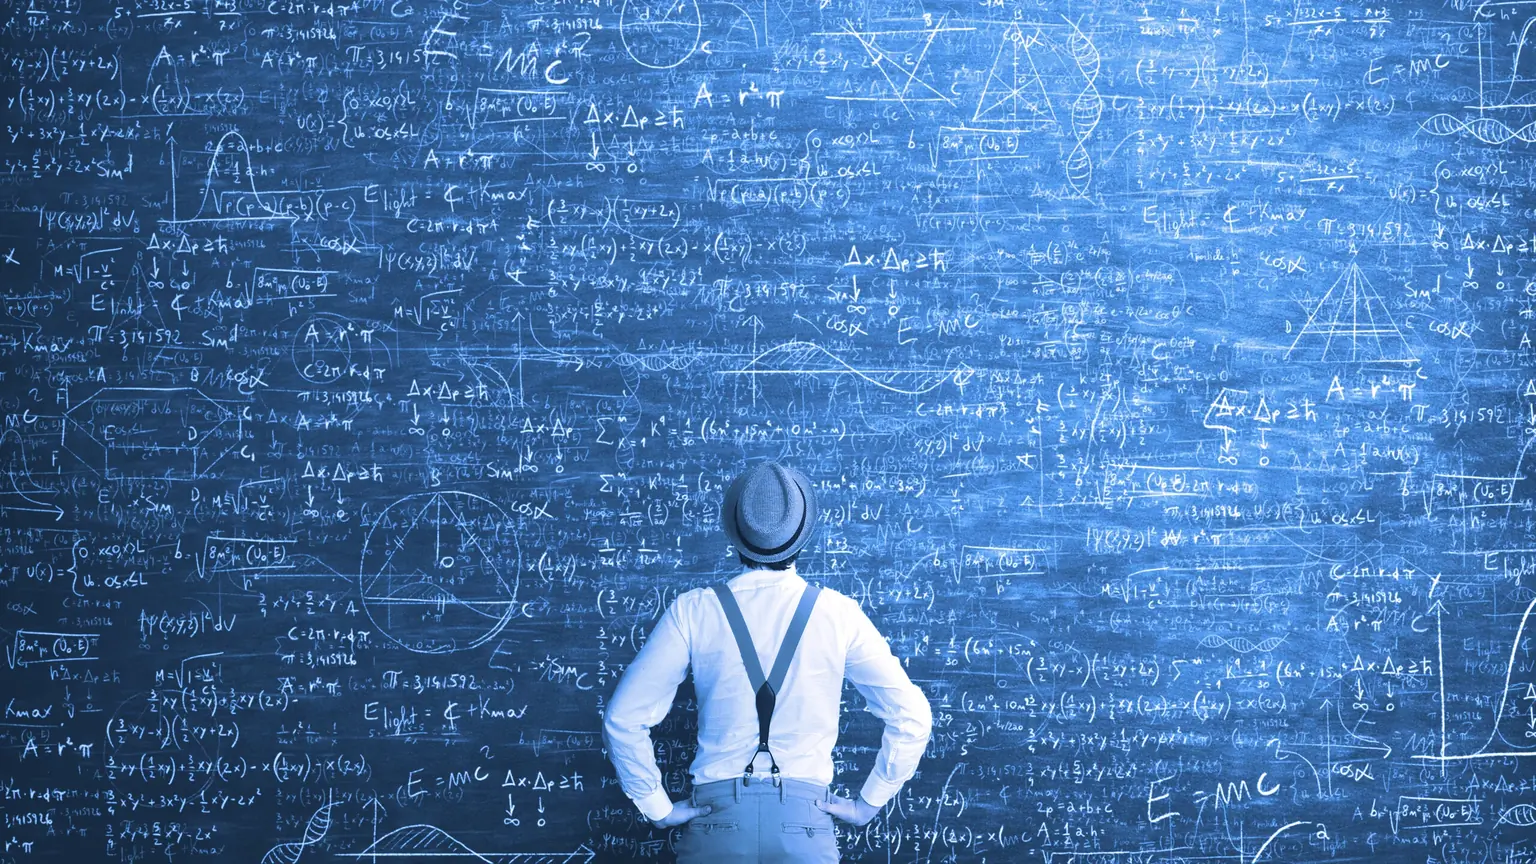 Bitcoin maxis figuring out ETH total supply be like. Image: Shutterstock